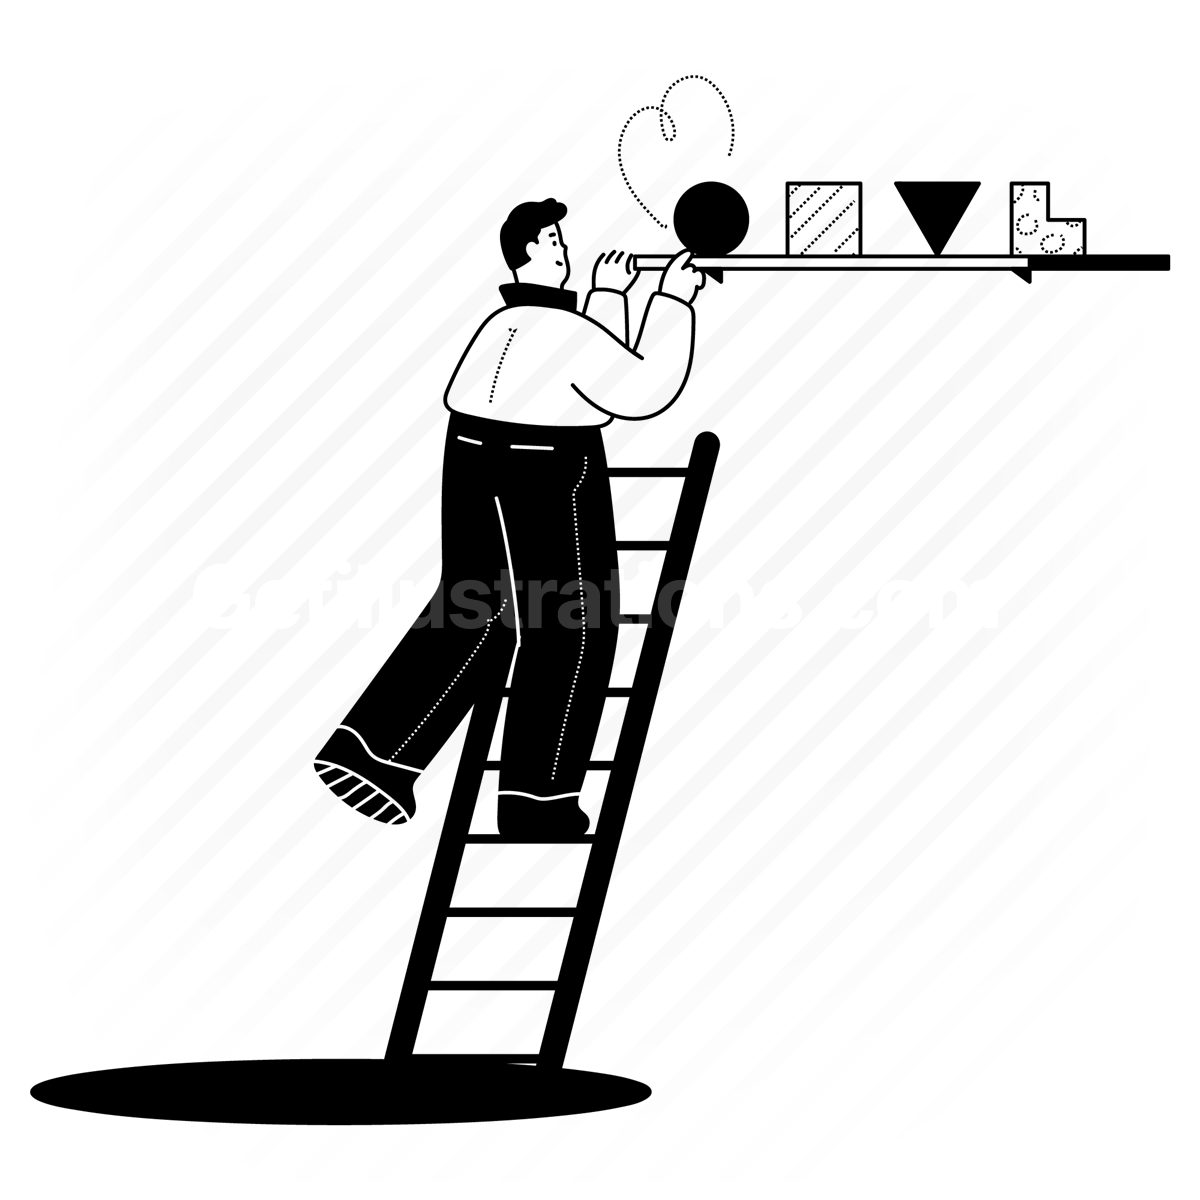 product, item, browse, view, ladder, climb, man, people